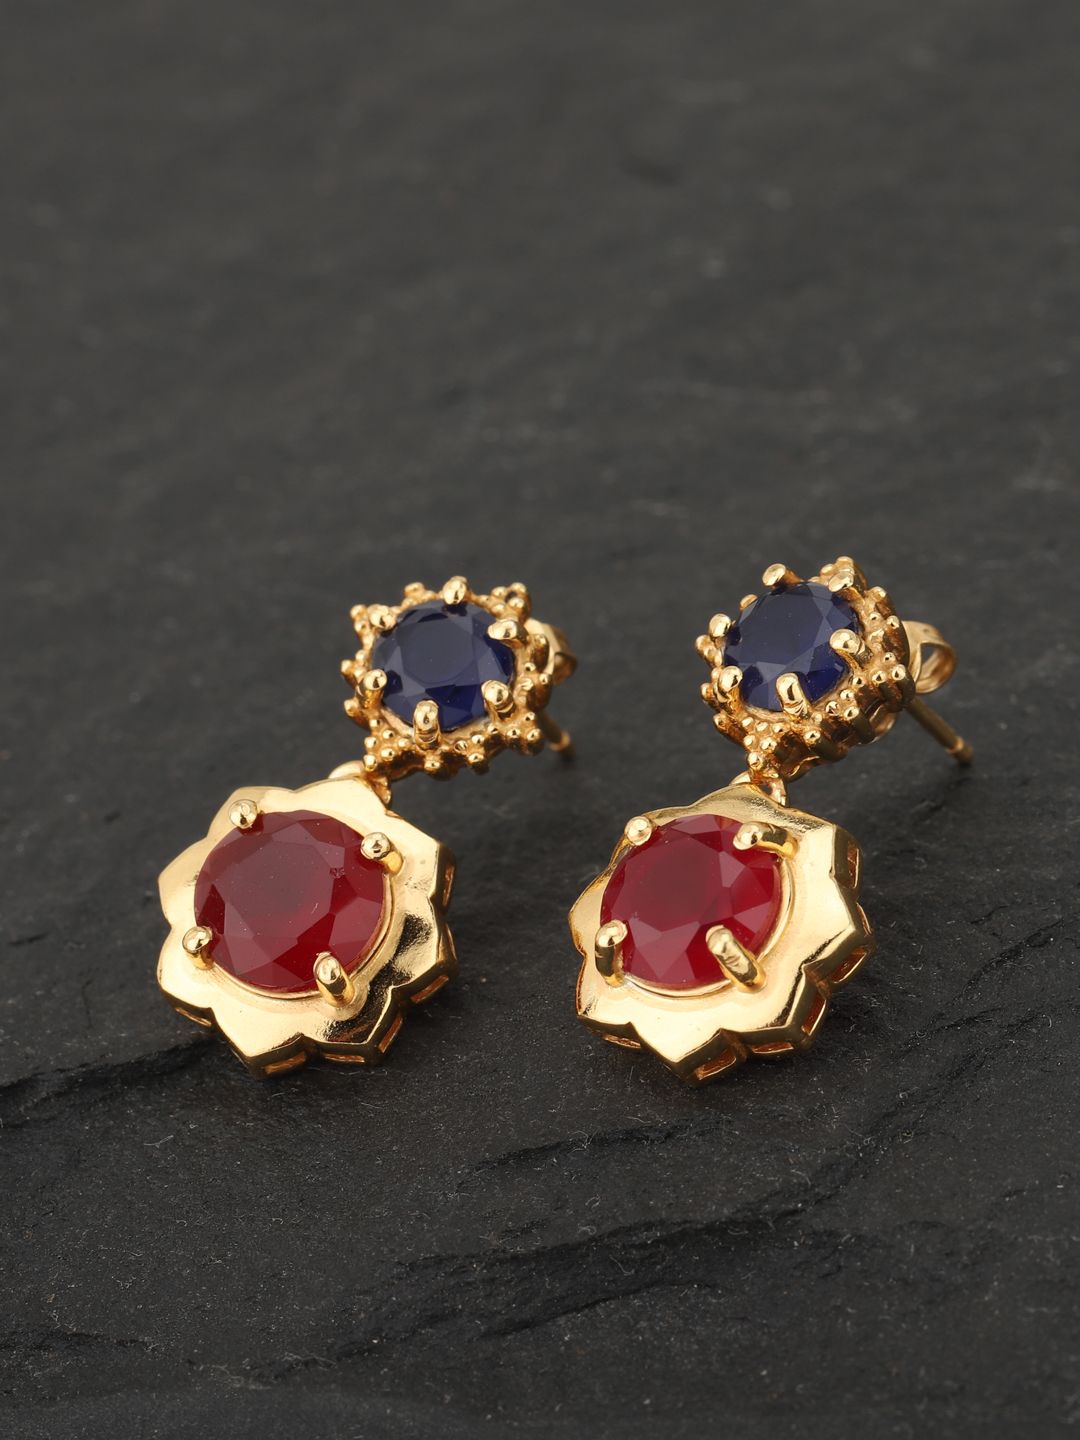 Carlton London Maroon & Navy Blue Gold-Plated Stone-Studded Floral Drop Earrings Price in India